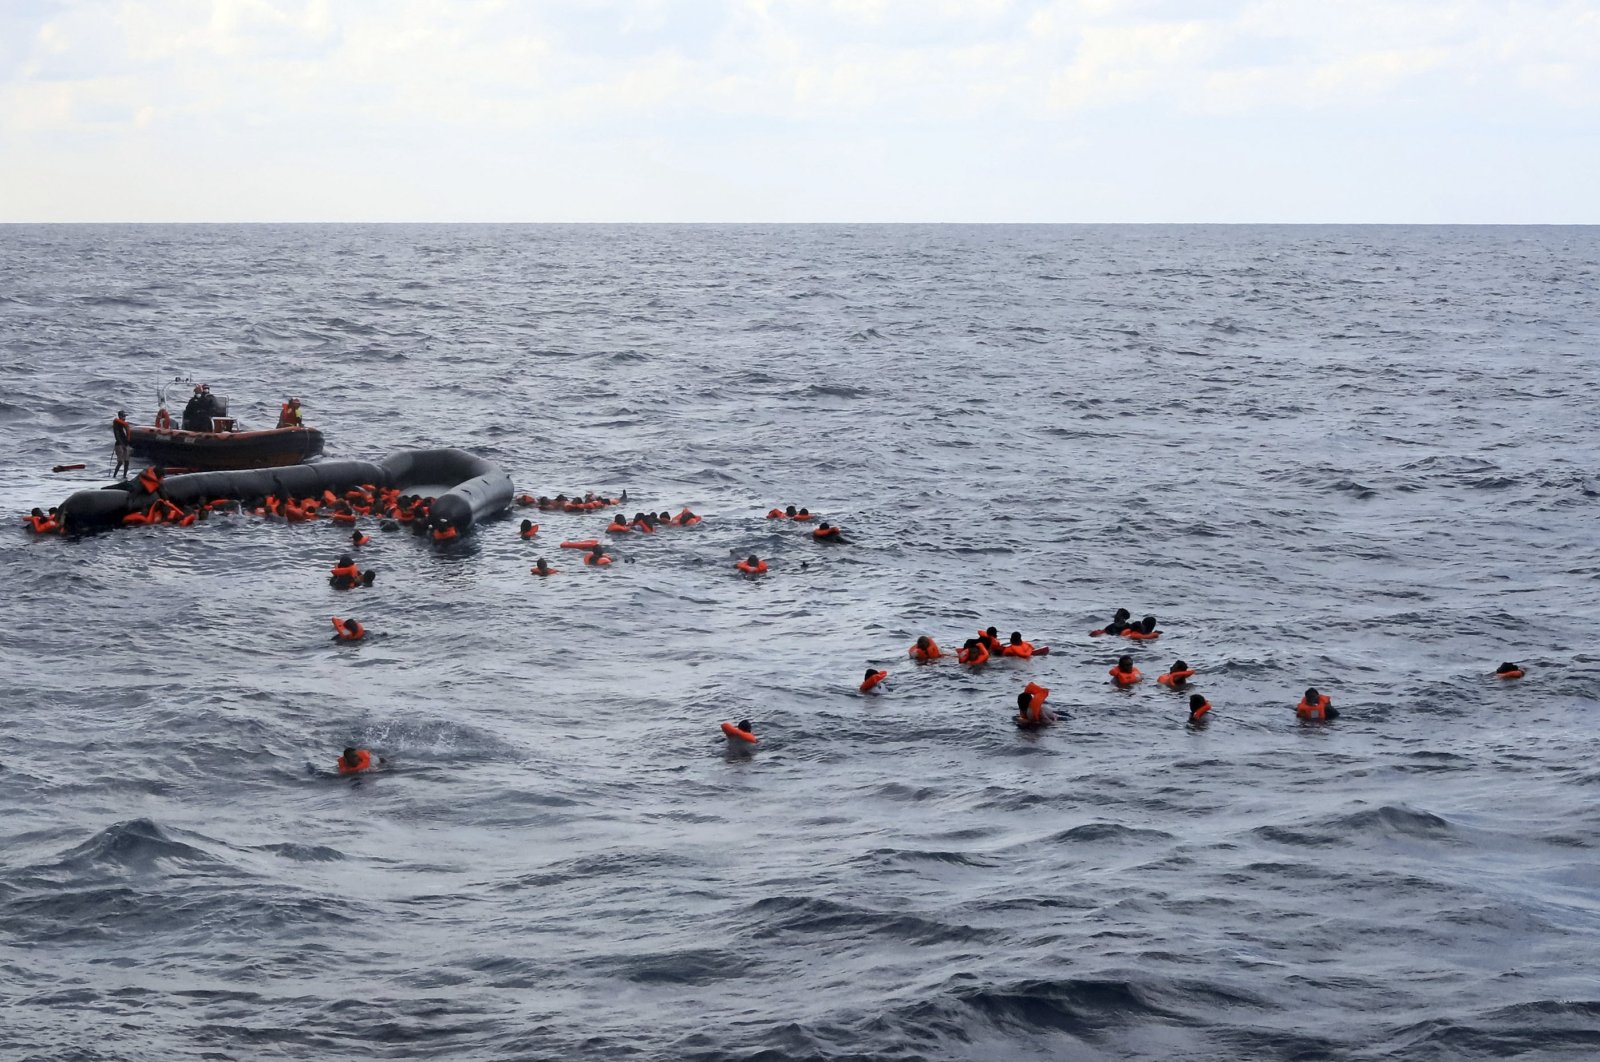 Refugees and migrants are rescued by members of the Spanish NGO Proactiva Open Arms, after leaving Libya trying to reach European soil aboard an overcrowded rubber boat in the Mediterranean Sea, Nov. 11, 2020. (AP Photo)